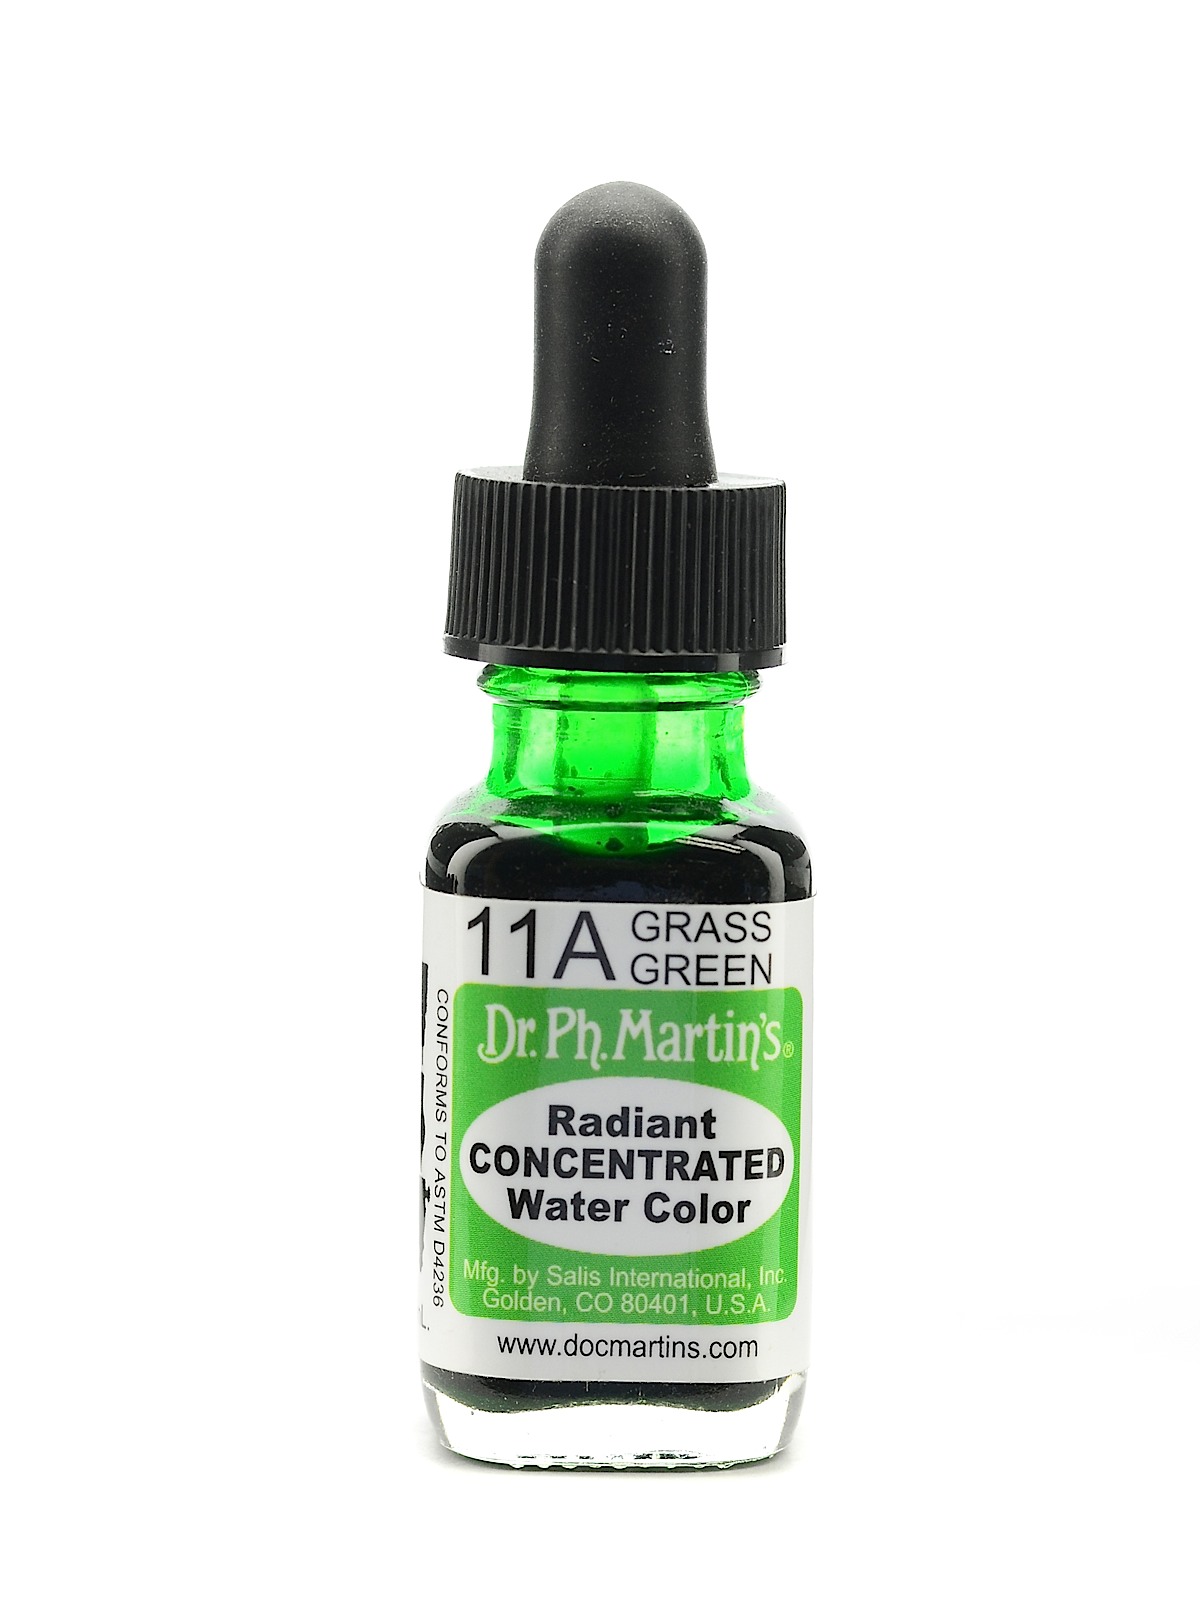 Radiant Concentrated Watercolors Grass Green 1 2 Oz.